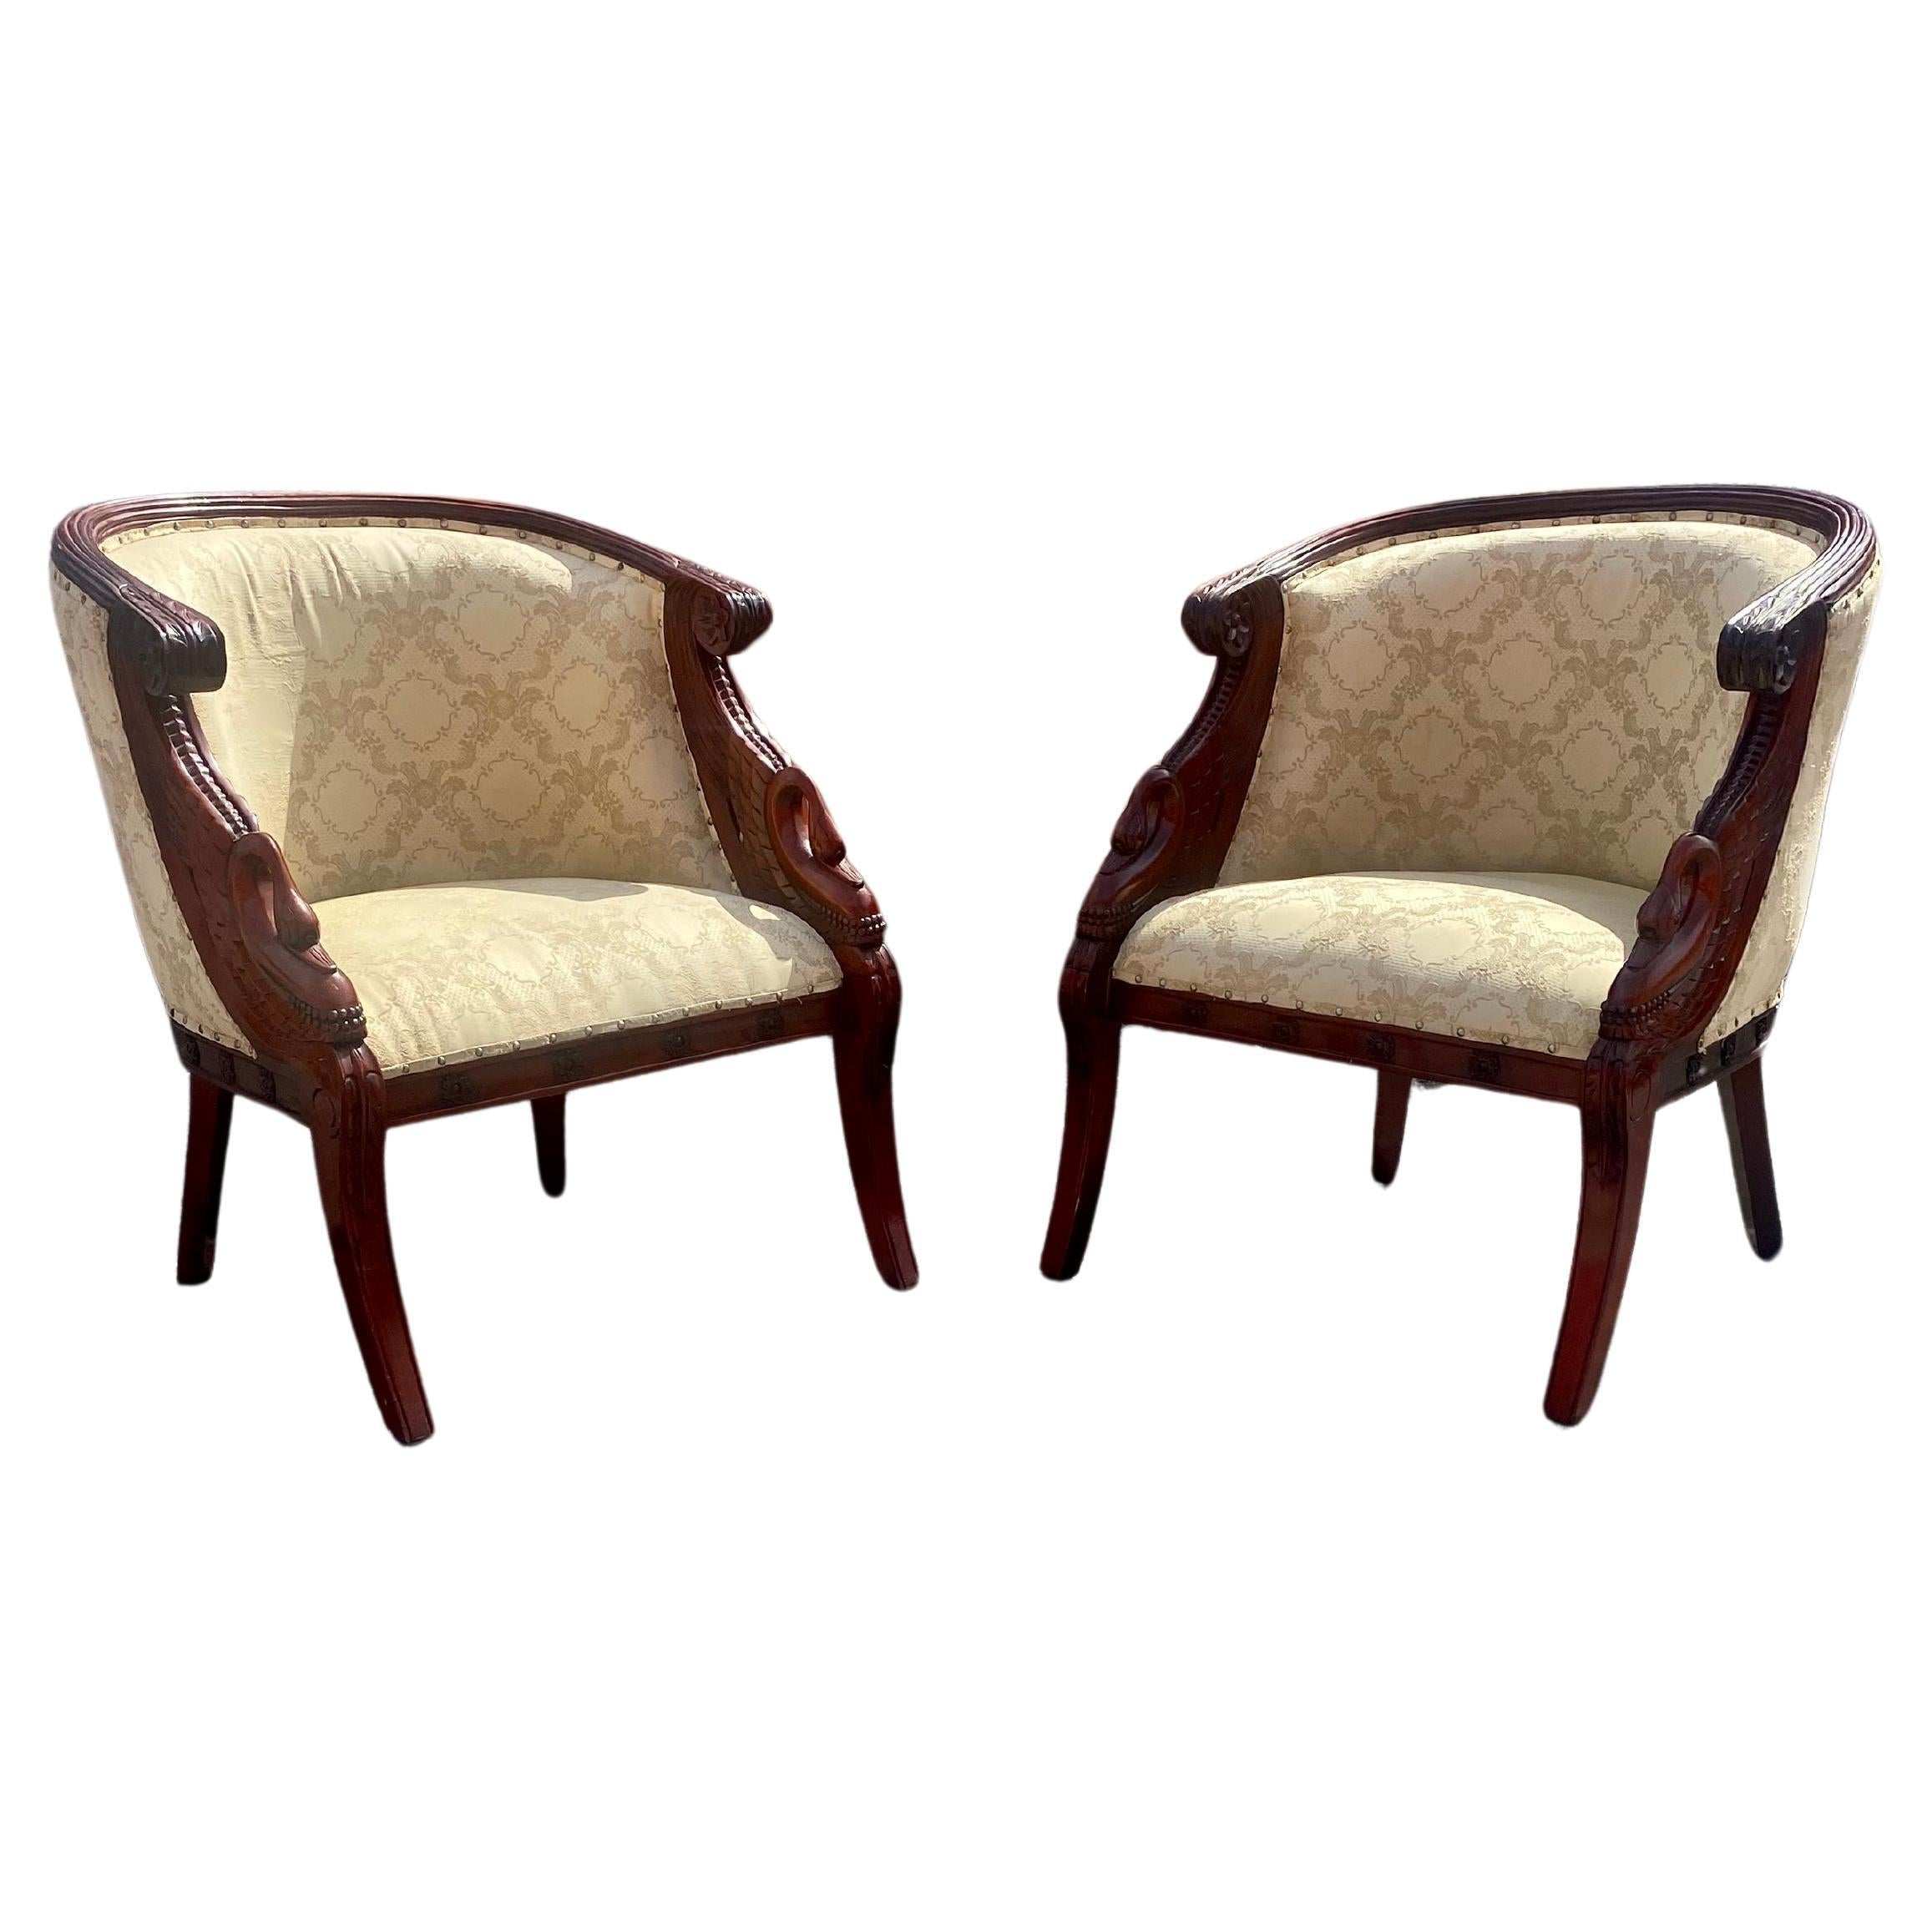 1940s Carved Gilt Wood Swan Barrel Chairs, Set of 2